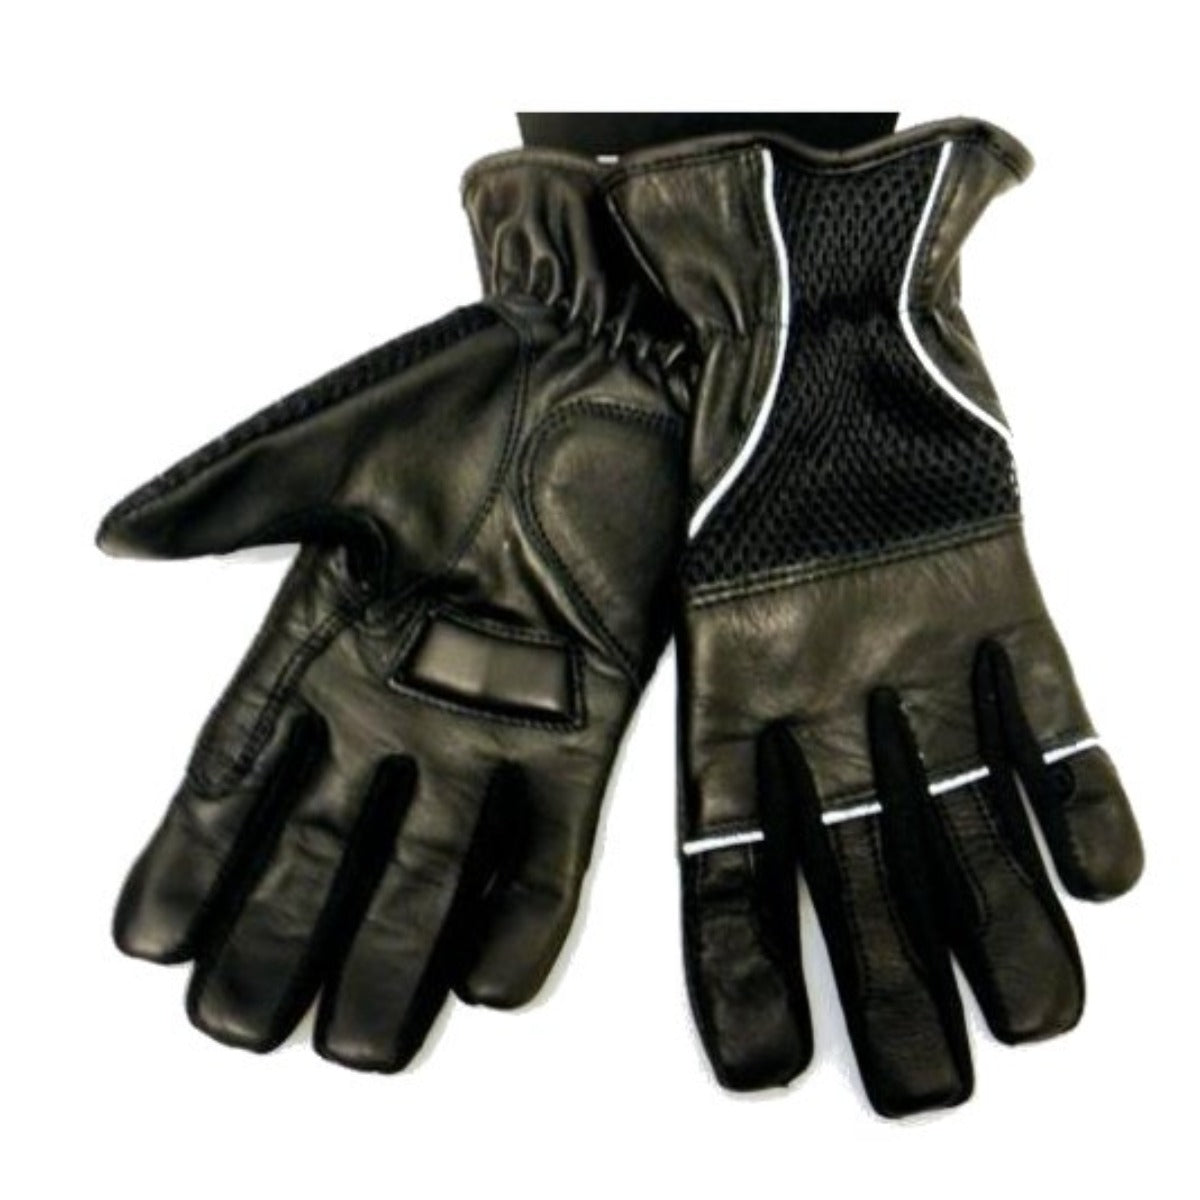 Vance Mesh & Leather Gloves with Padded Palms, Reflective Piping and Elastic Cuff